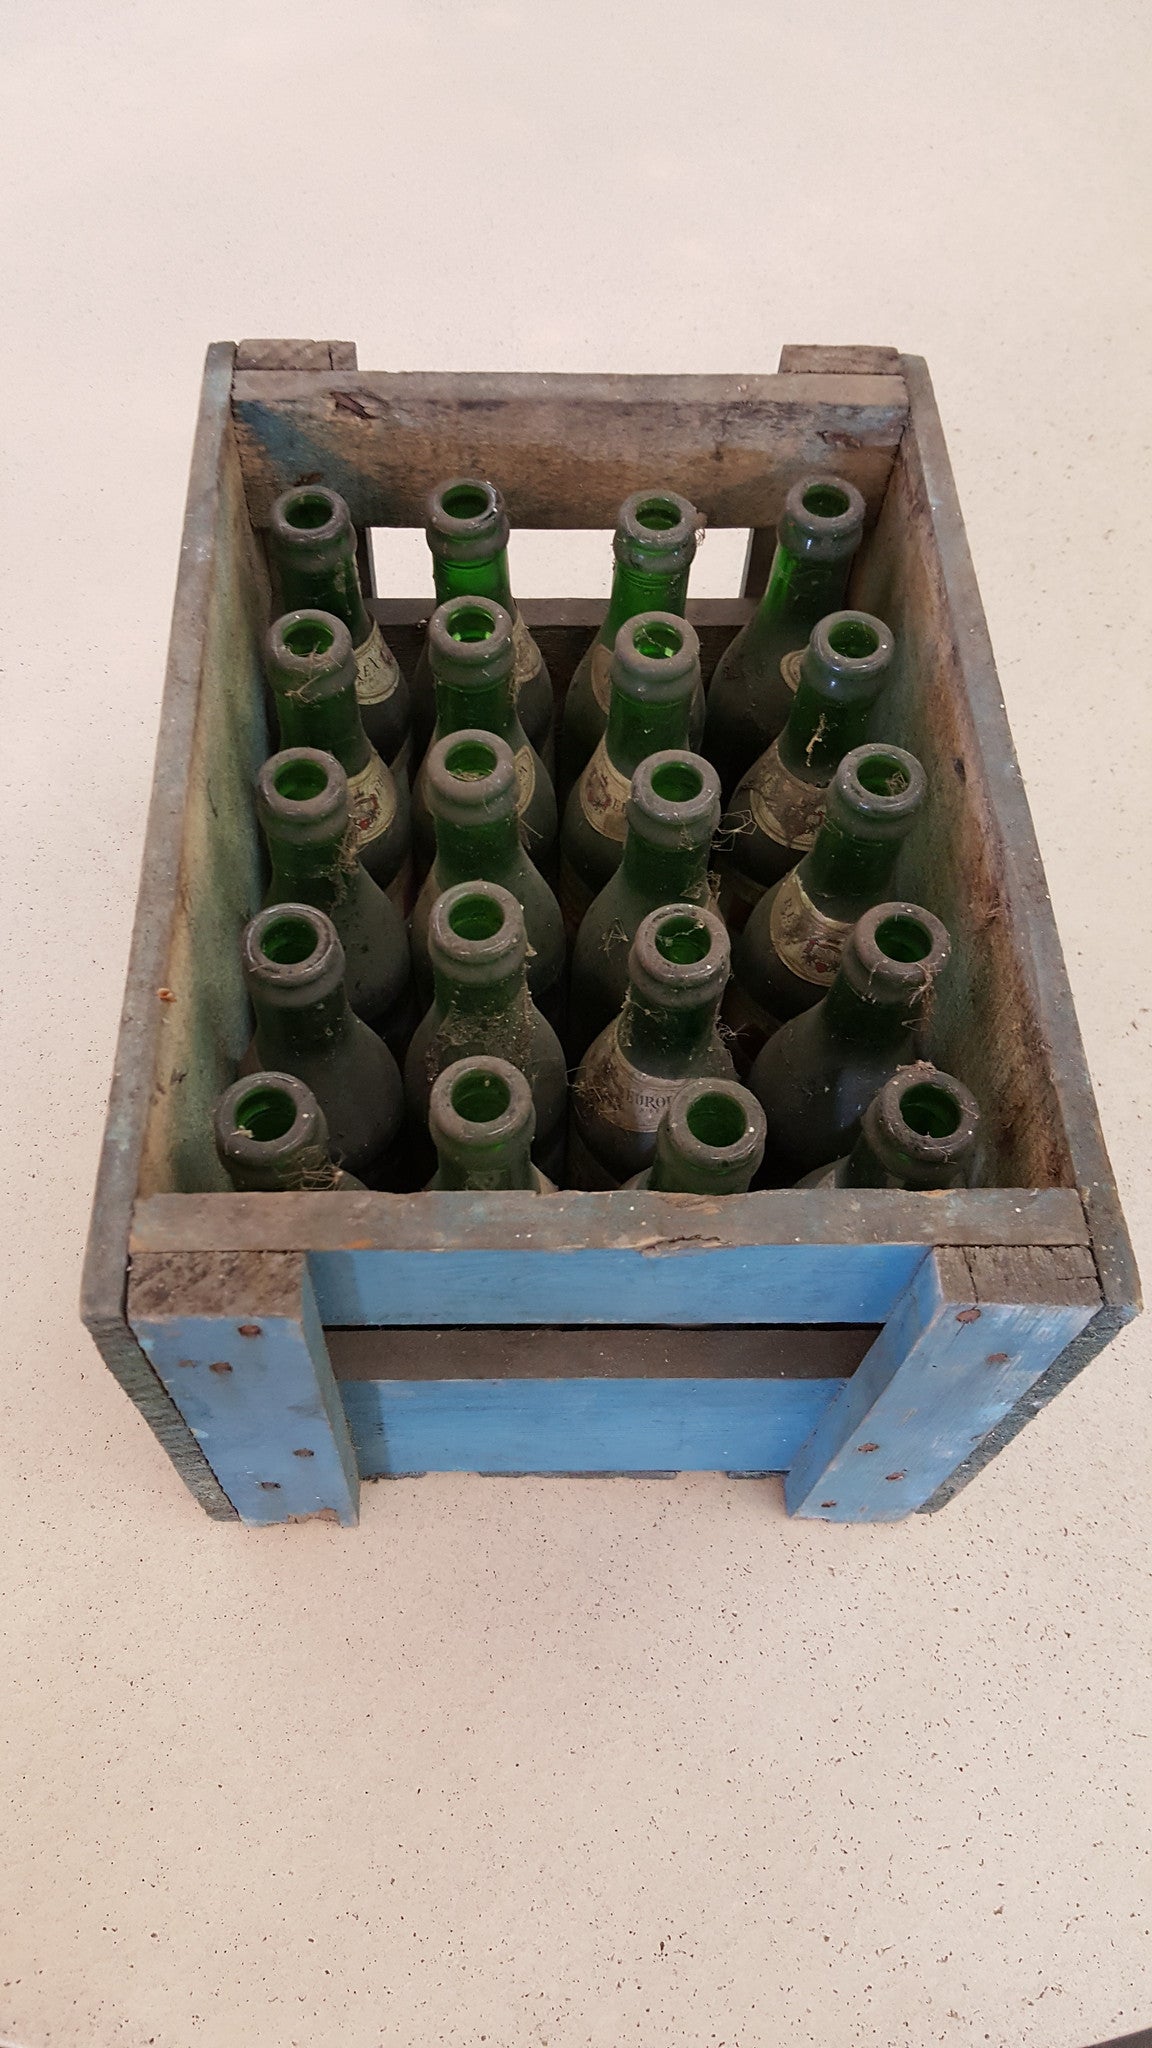 Small Blue Crate with Bottles